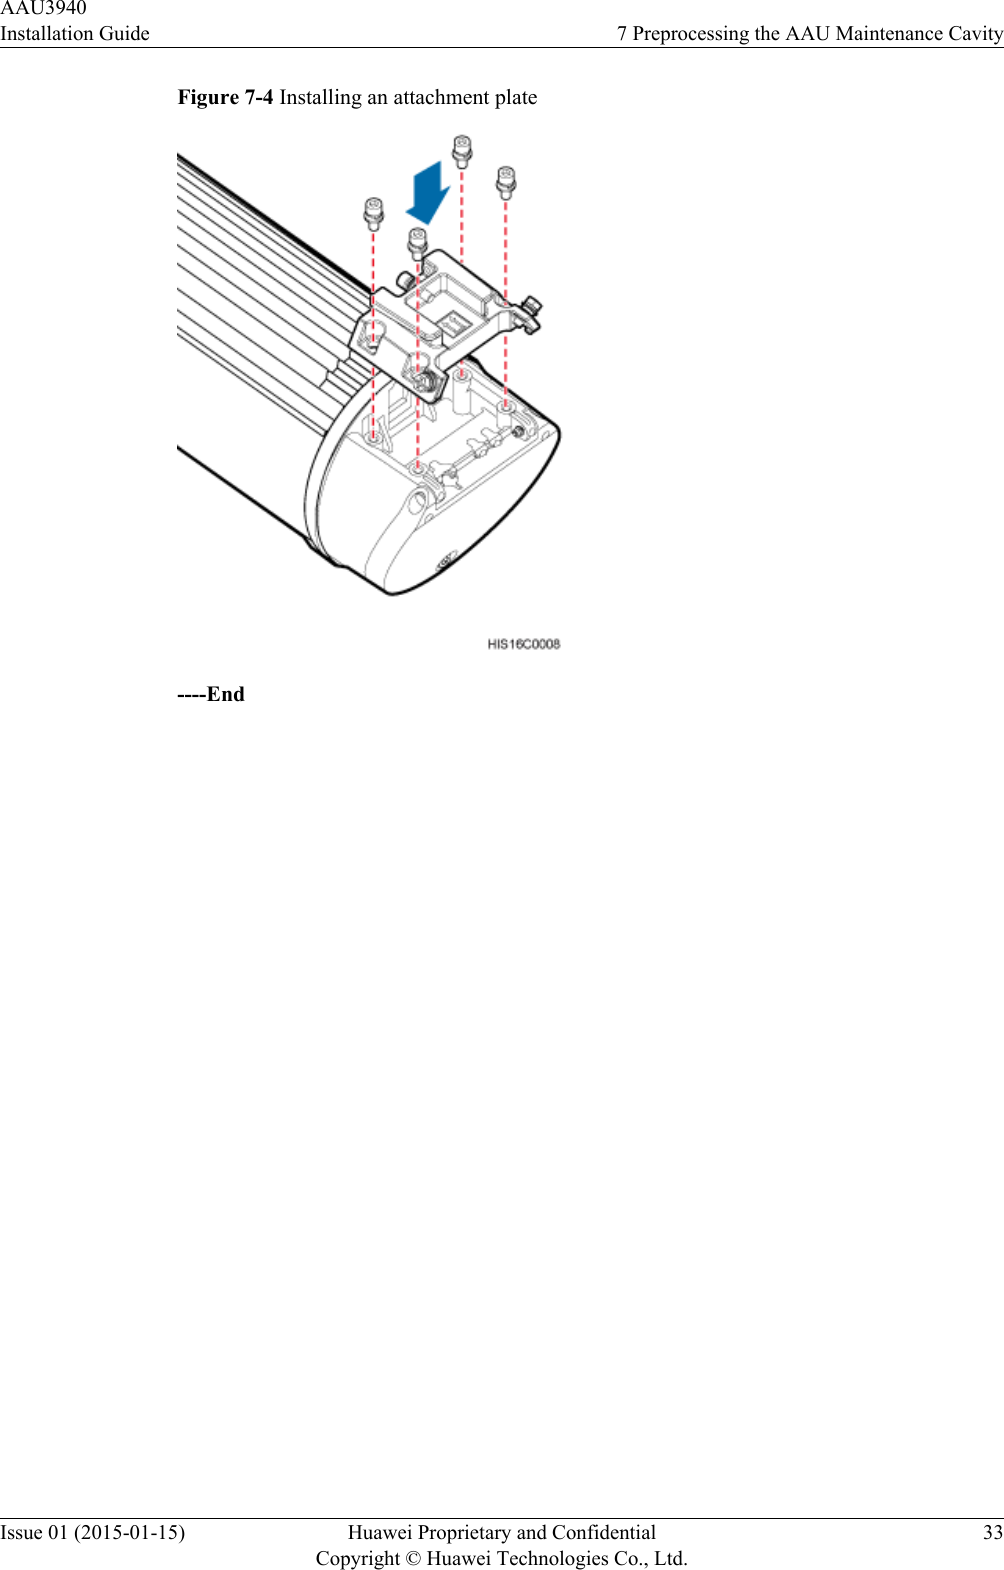 Figure 7-4 Installing an attachment plate----EndAAU3940Installation Guide 7 Preprocessing the AAU Maintenance CavityIssue 01 (2015-01-15) Huawei Proprietary and ConfidentialCopyright © Huawei Technologies Co., Ltd.33